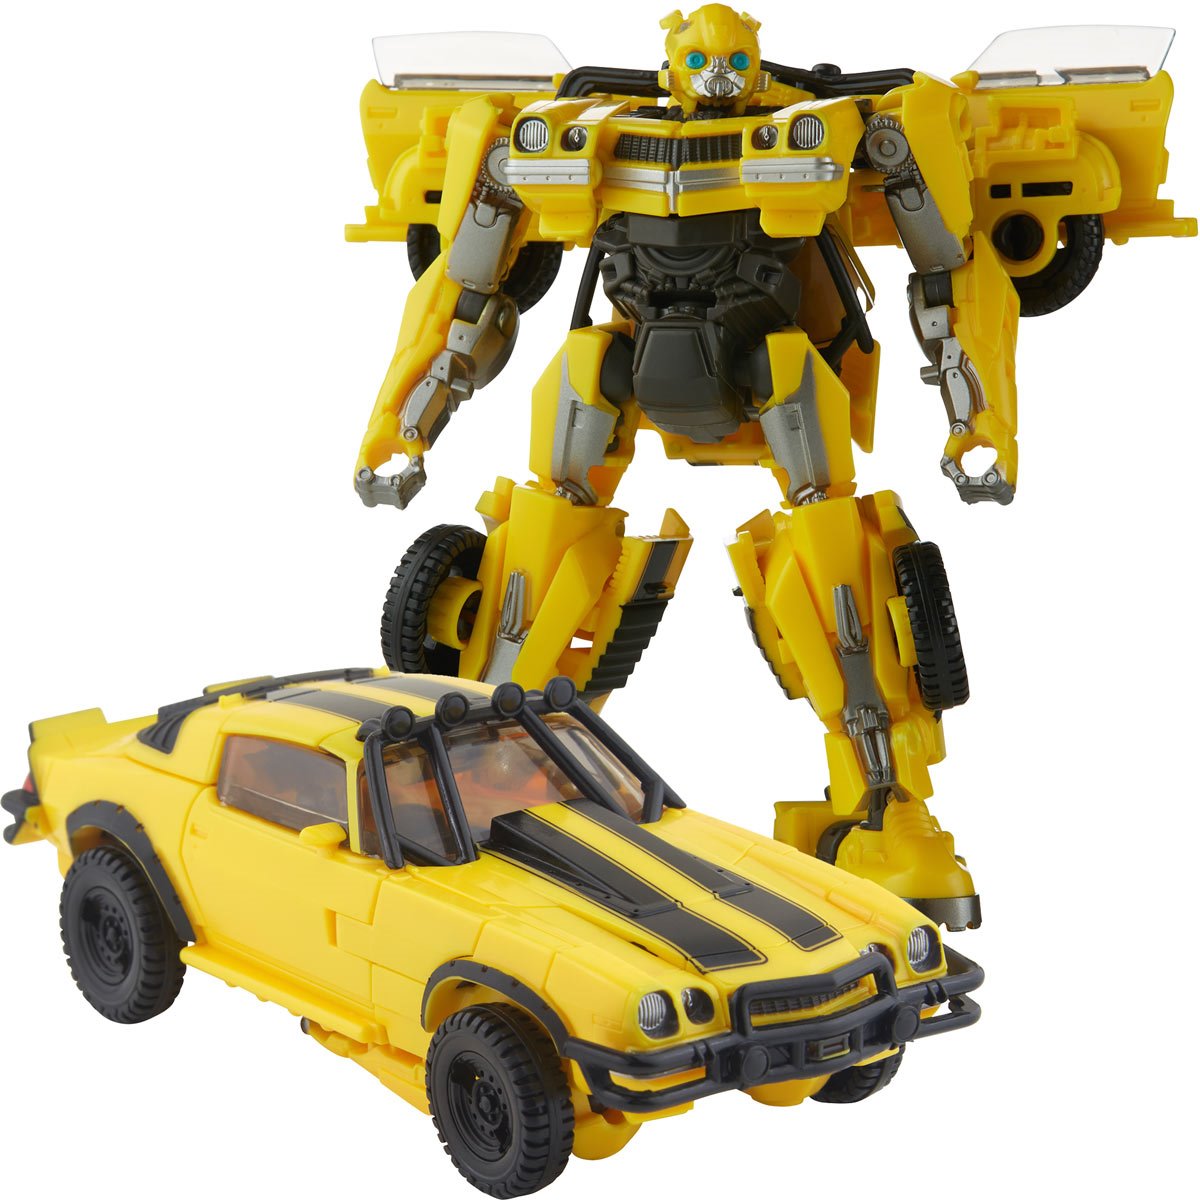 Transformers Studio Series Deluxe Rise of the Beasts Bumblebee Action Figure Toy